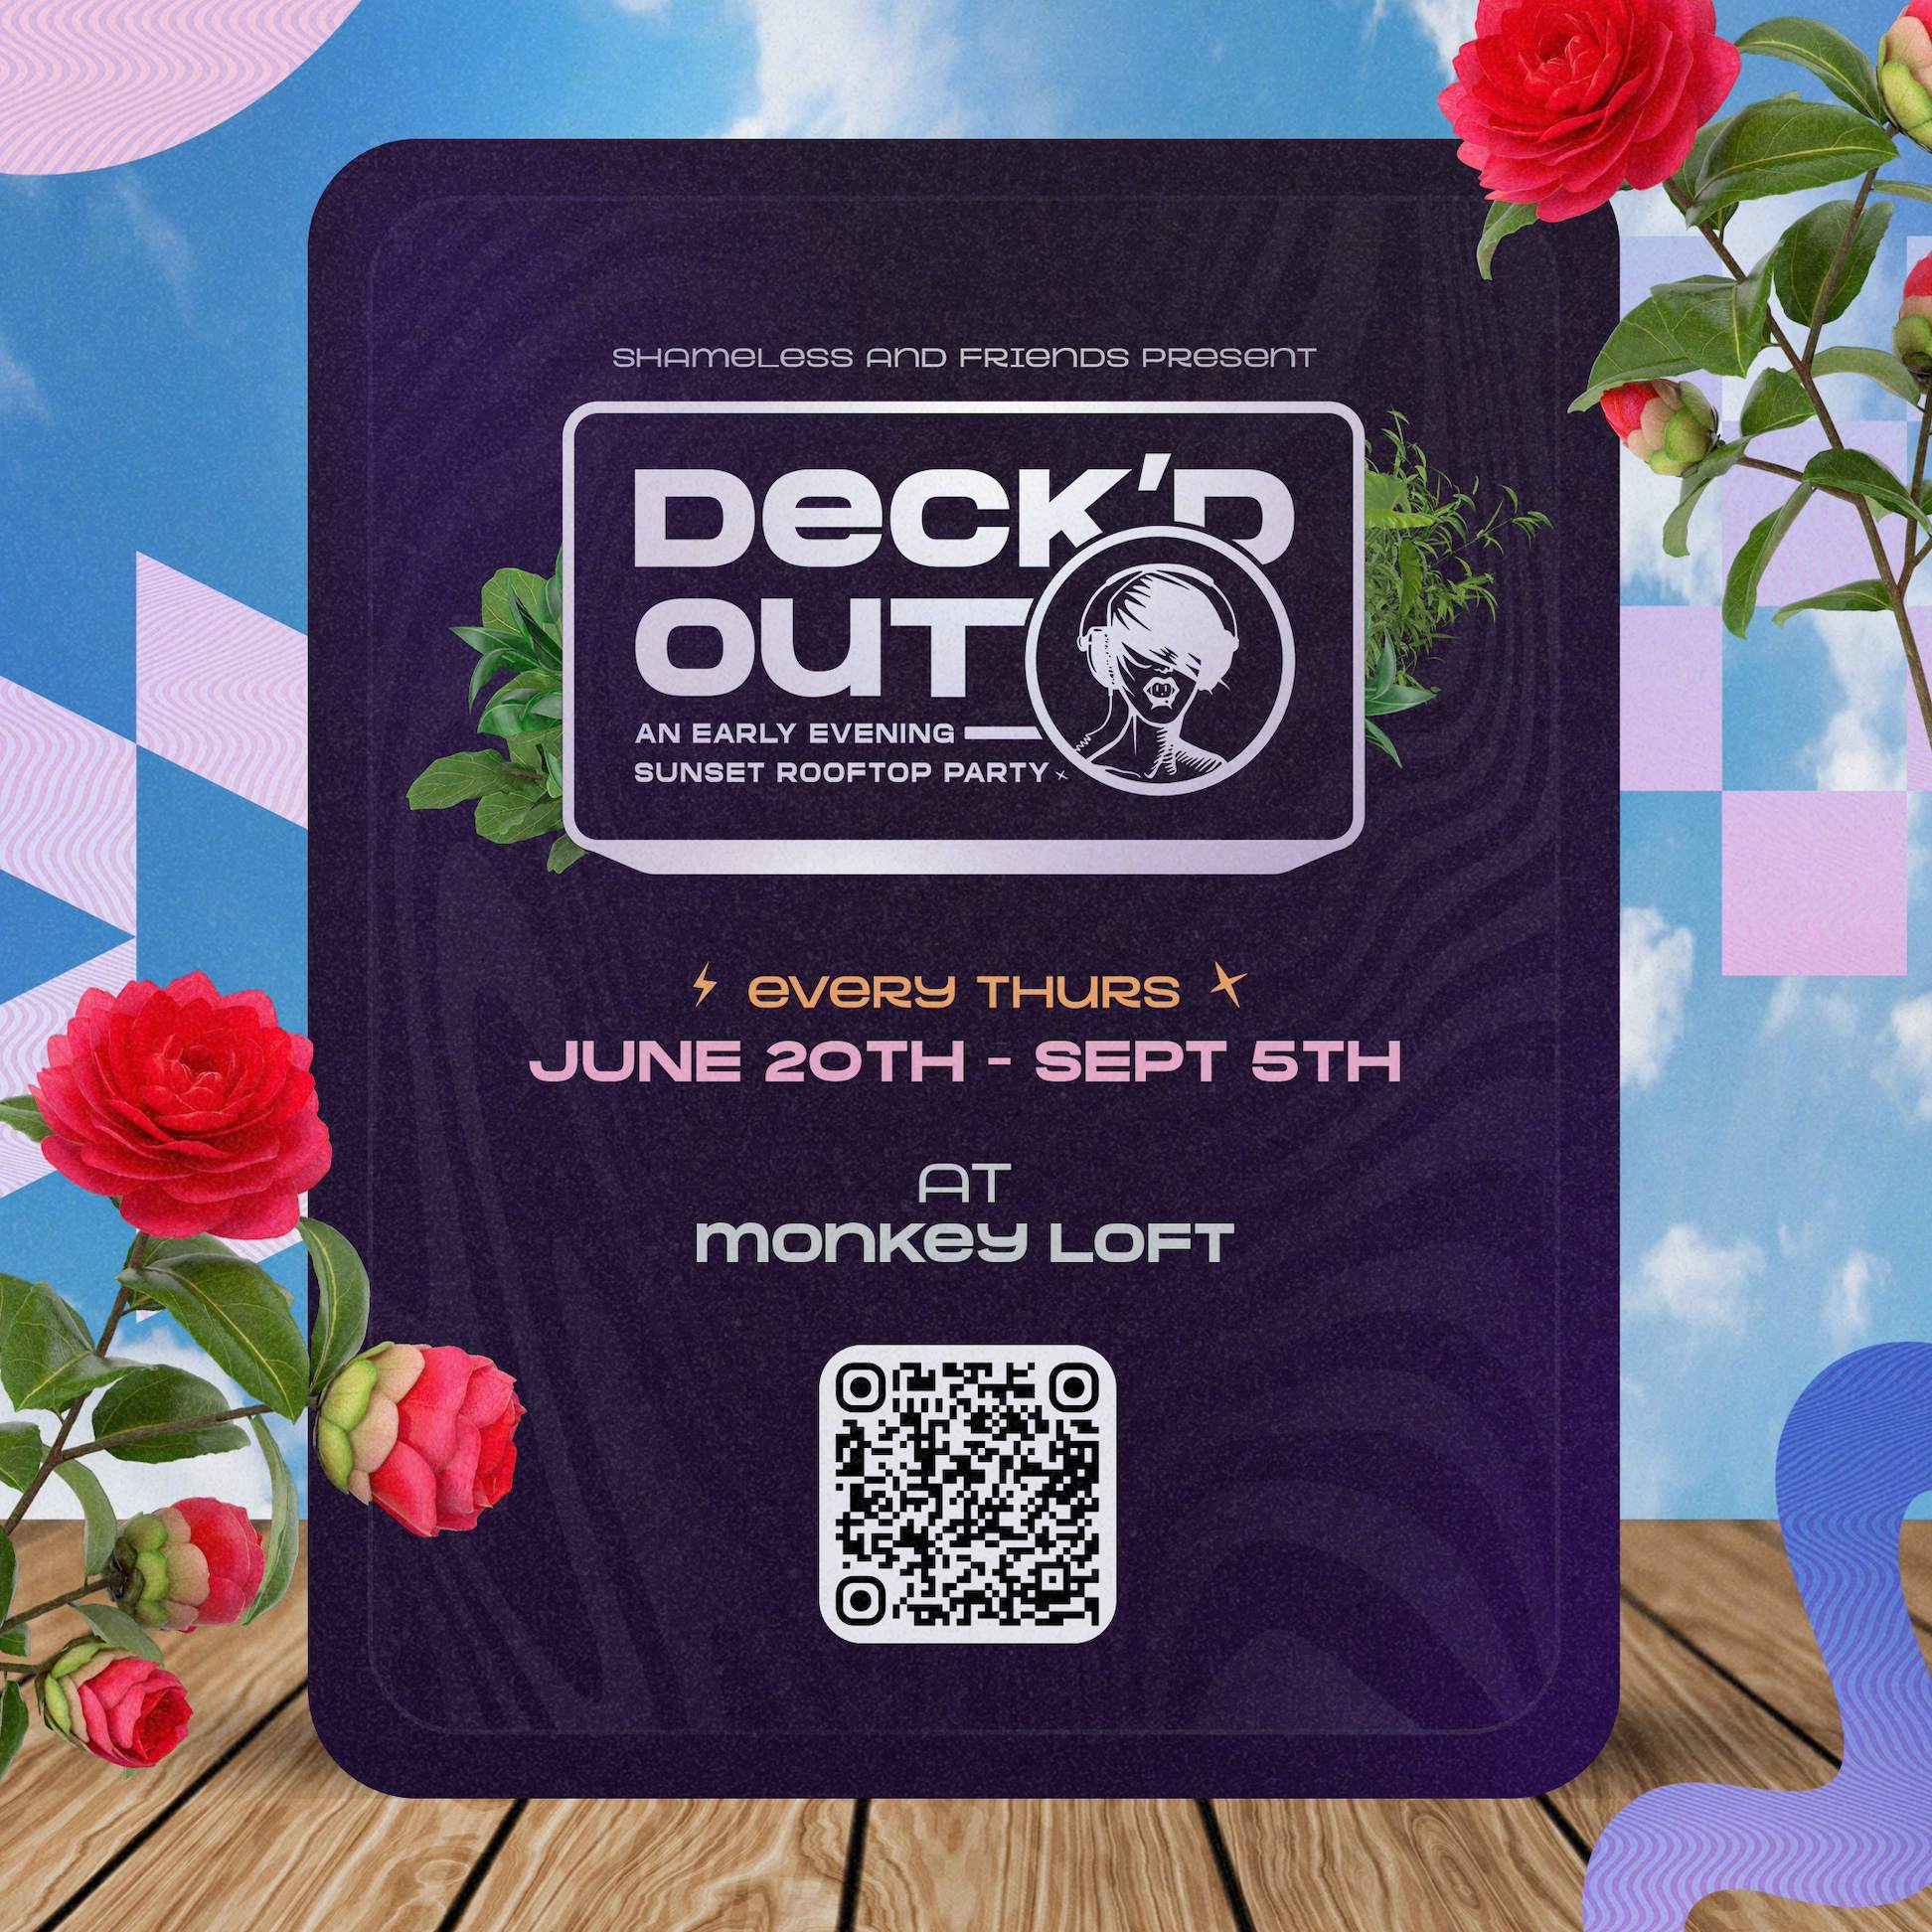 Deck'd Out #5 feat. Robag Wruhme (Germany), Aivilo & Peer Pressure - フライヤー表